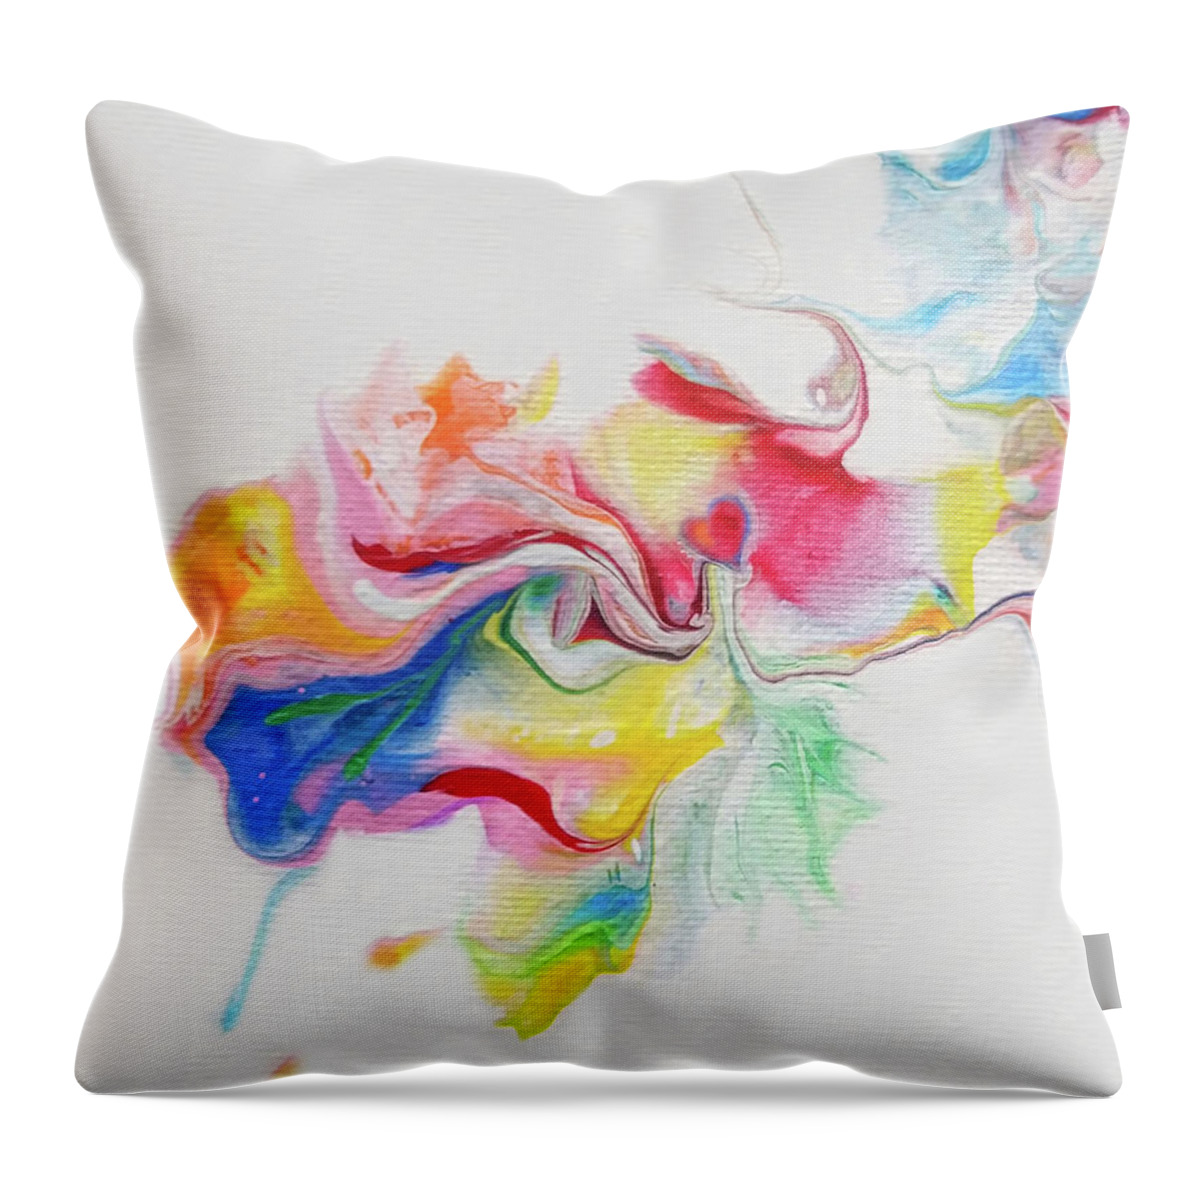 Rainbow Colors Throw Pillow featuring the painting Still Here by Deborah Erlandson